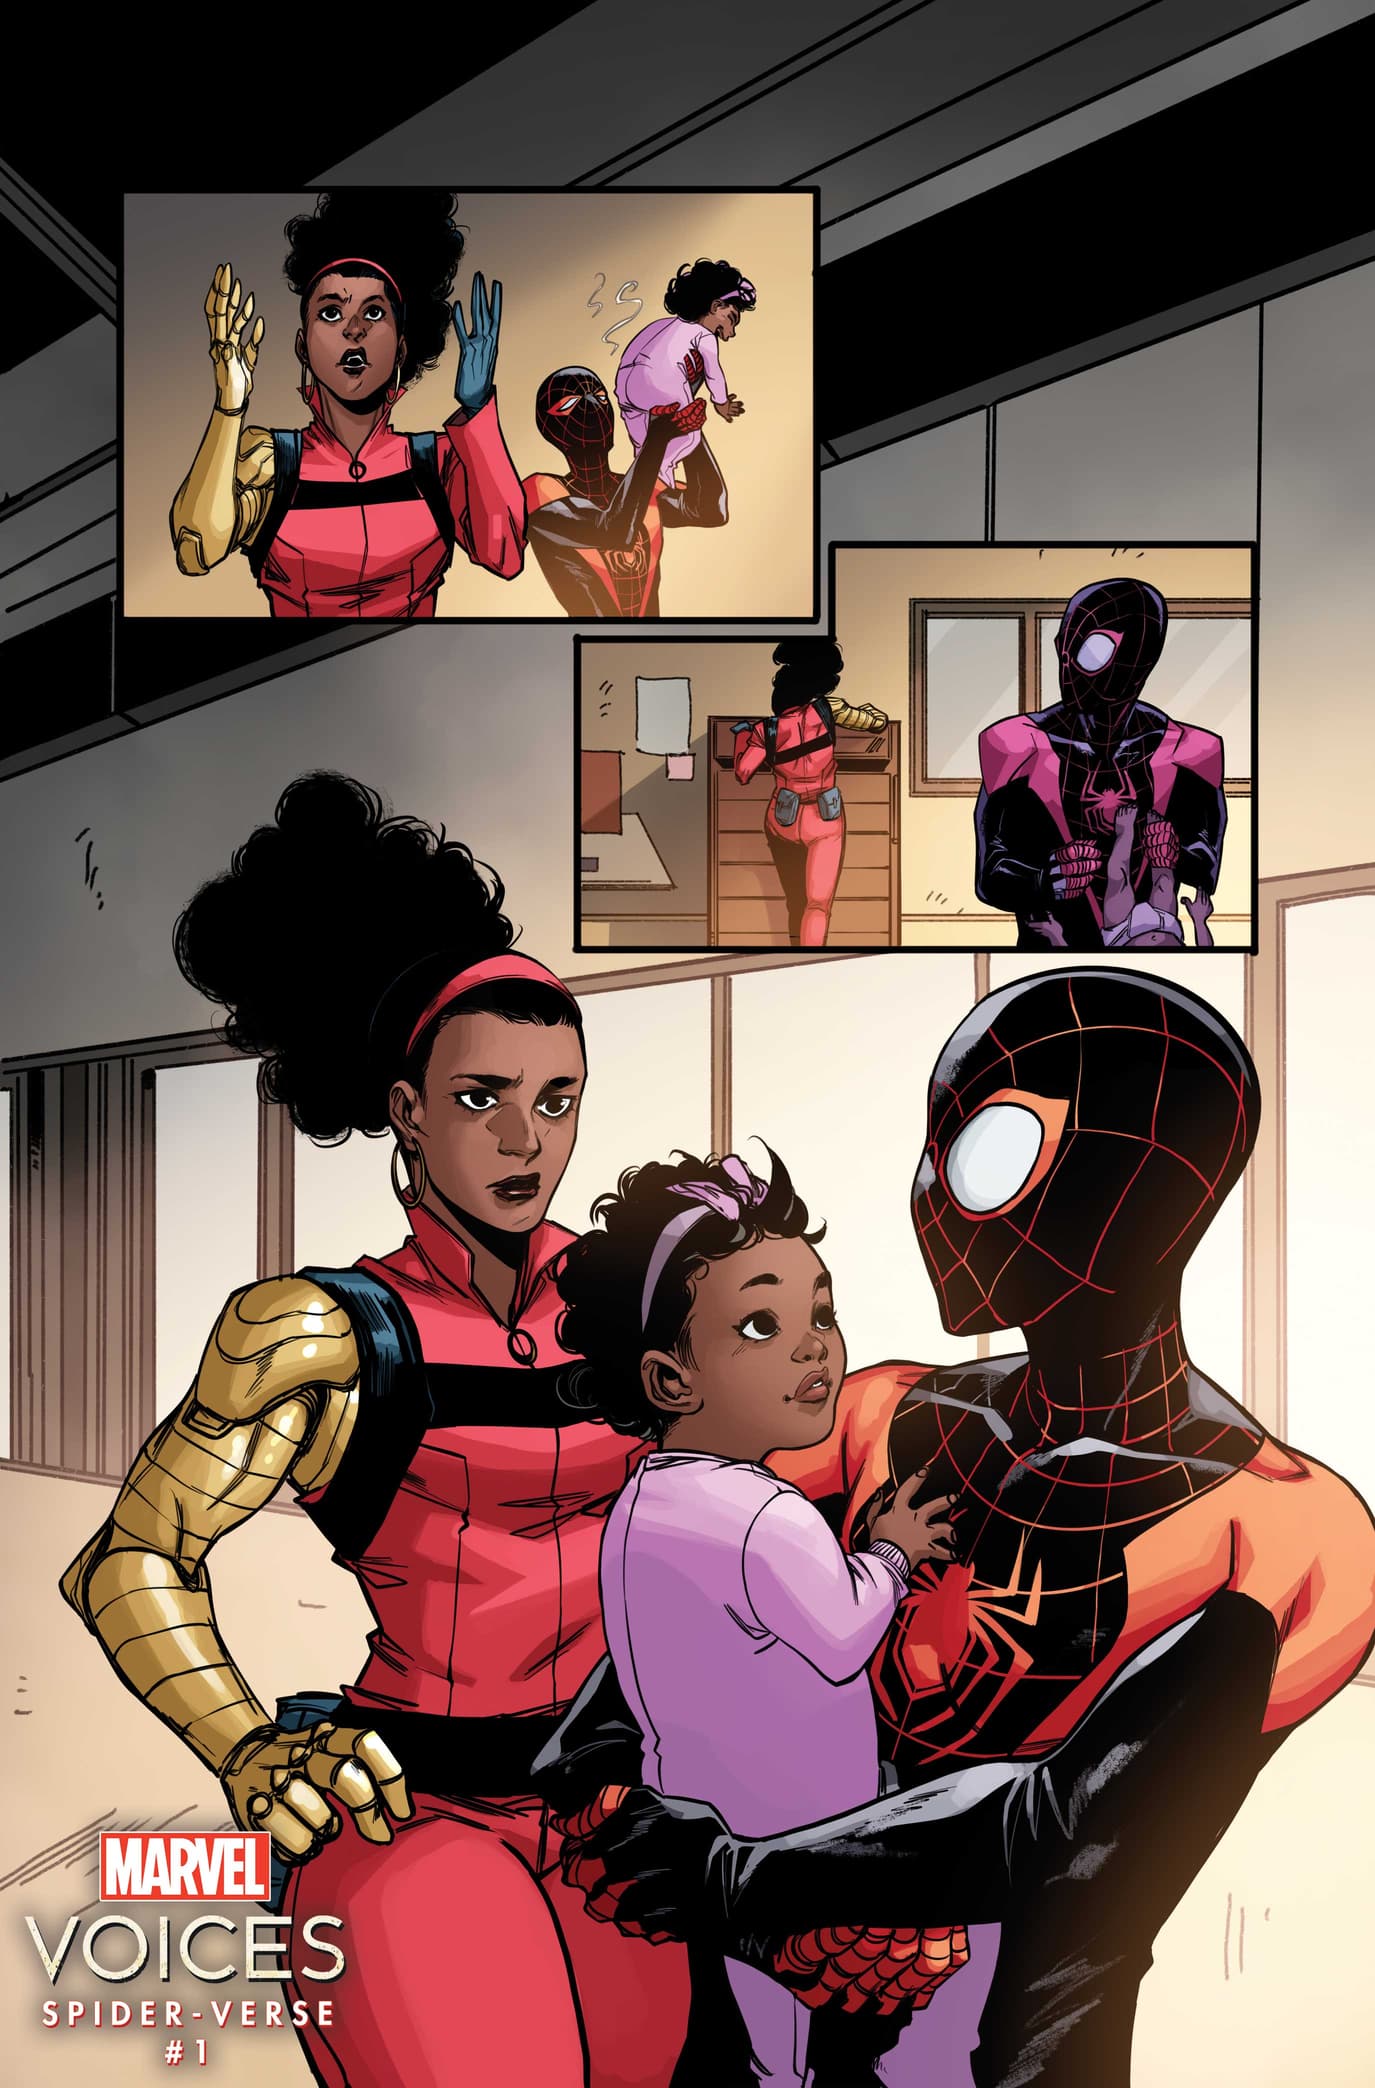 MARVEL’S VOICES: SPIDER-VERSE #1 - “Training Day” artwork by Jahnoy Lindsay